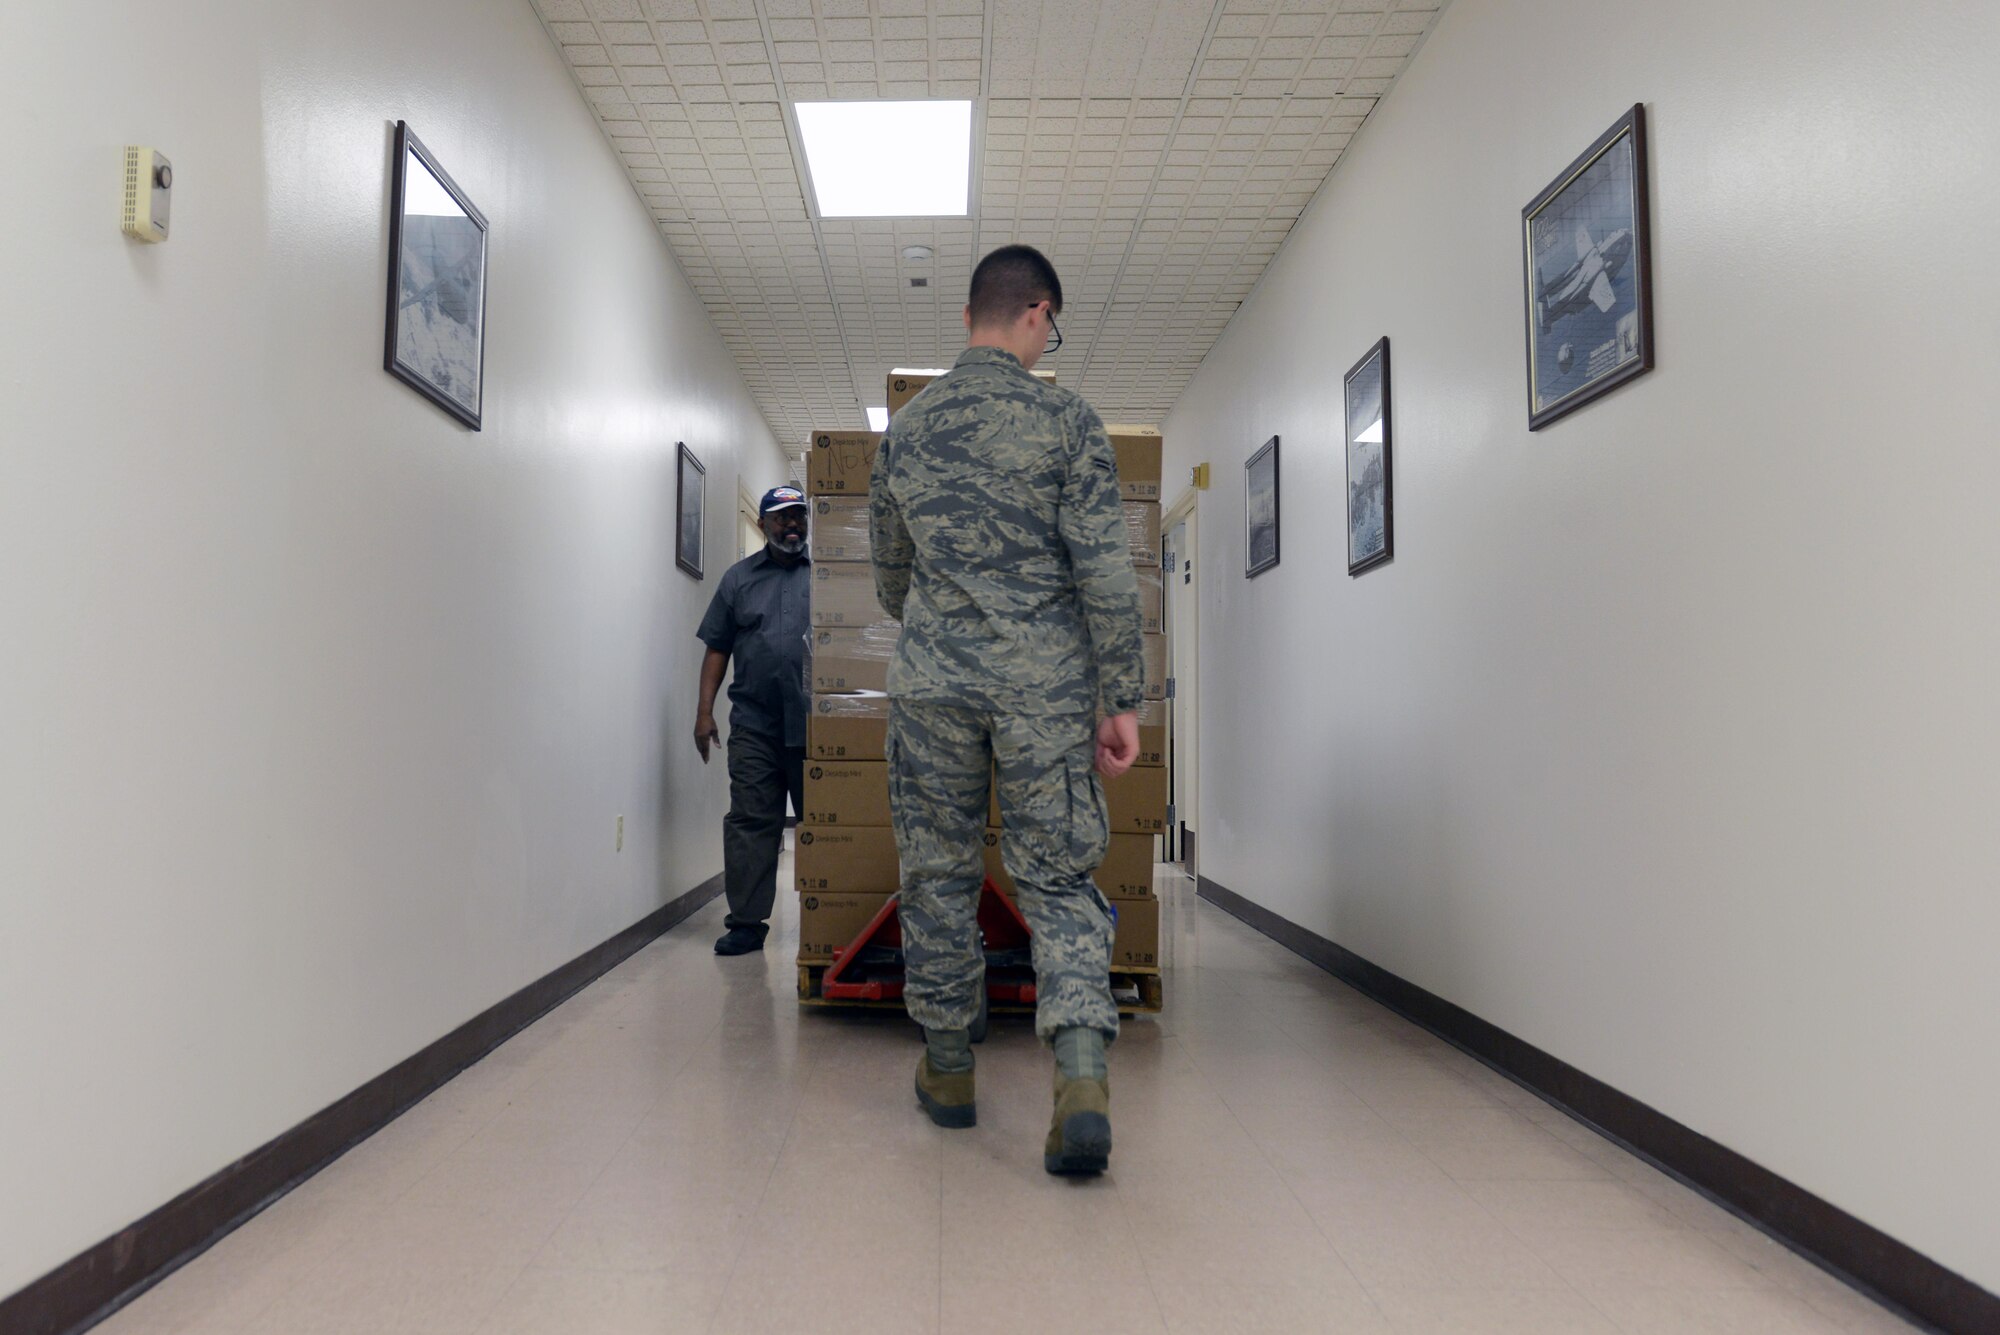 Airman 1st Class Aric McCartt, 673d Communication Squadron client systems technician, moves the next batch of computers to be imaged at Joint Base Elmendorf-Richardson, Alaska, Nov. 20, 2017. The 673d CS are able to image up to 48 computers in less than four hours on a single server after several innovative redesigns to their imaging process.